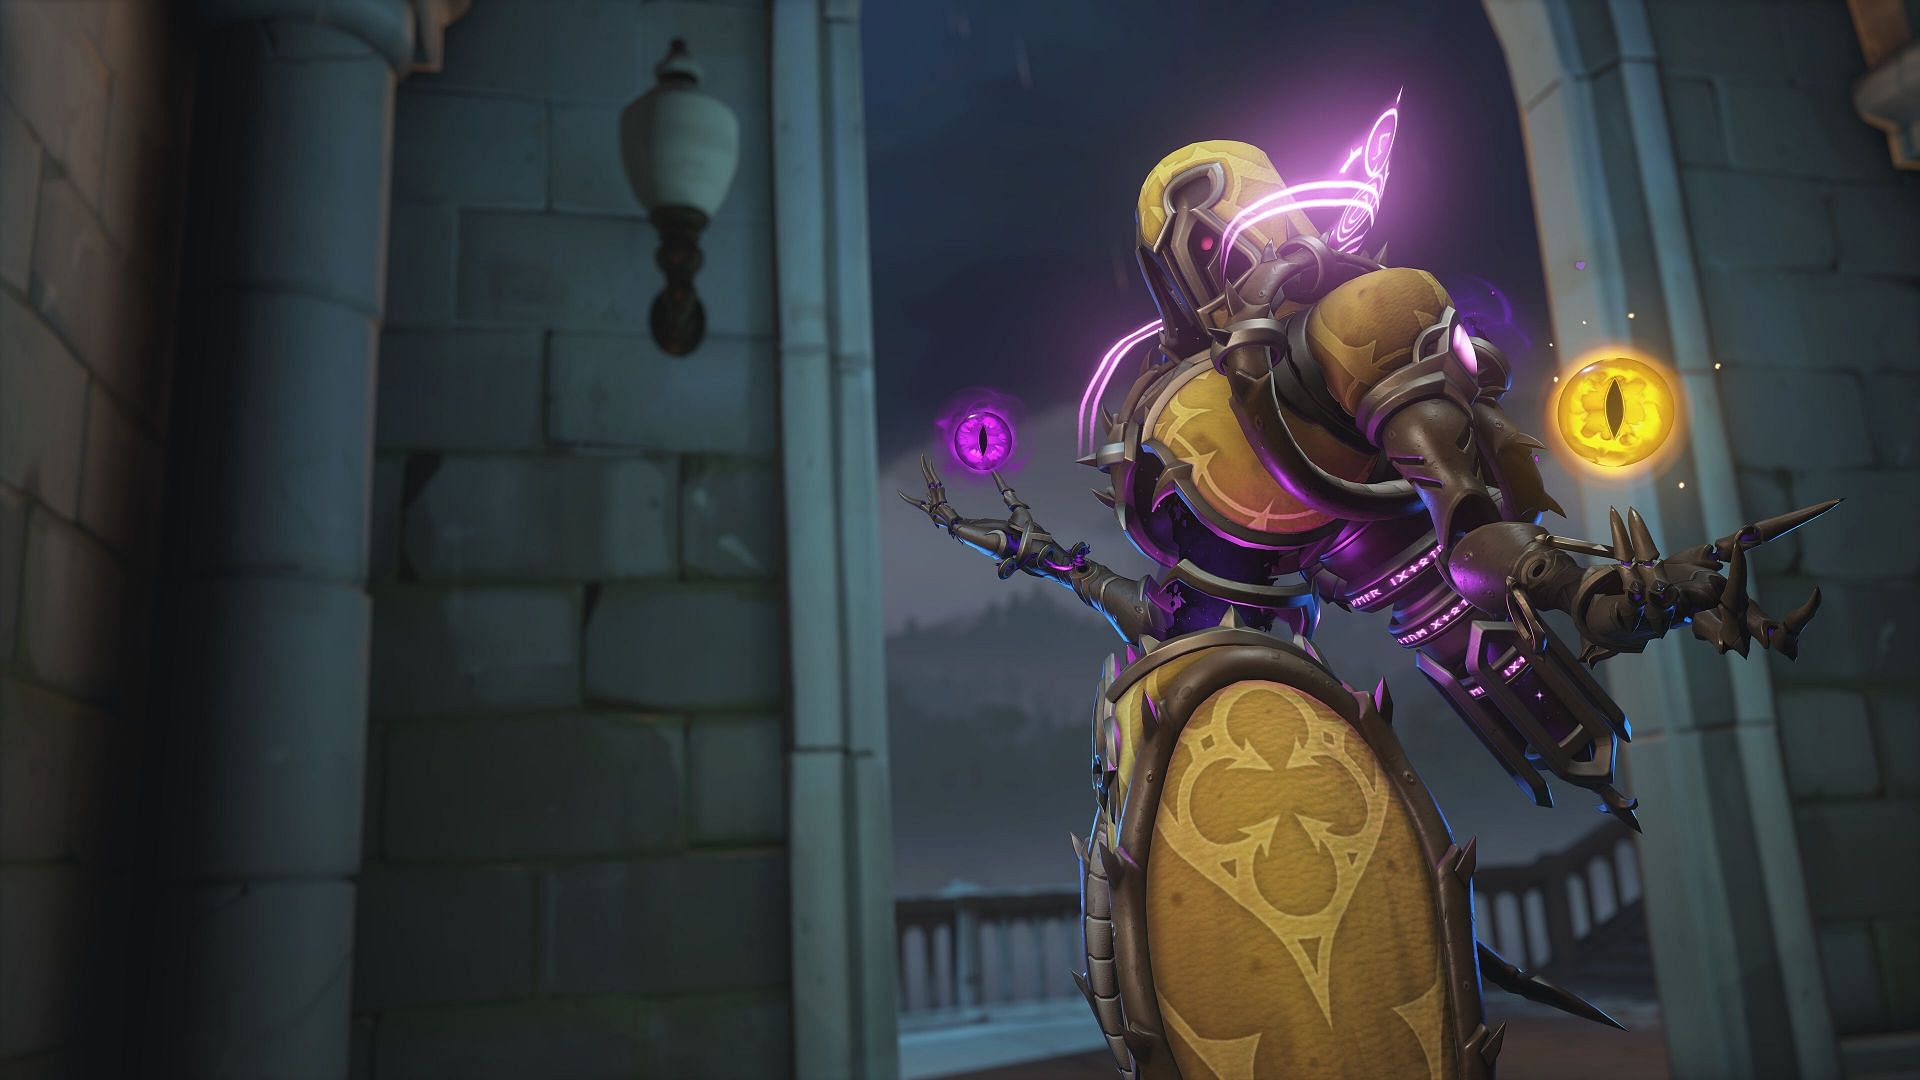 The latest Mythic skin for Season 9 in the game (Image via Blizzard Entertainment)